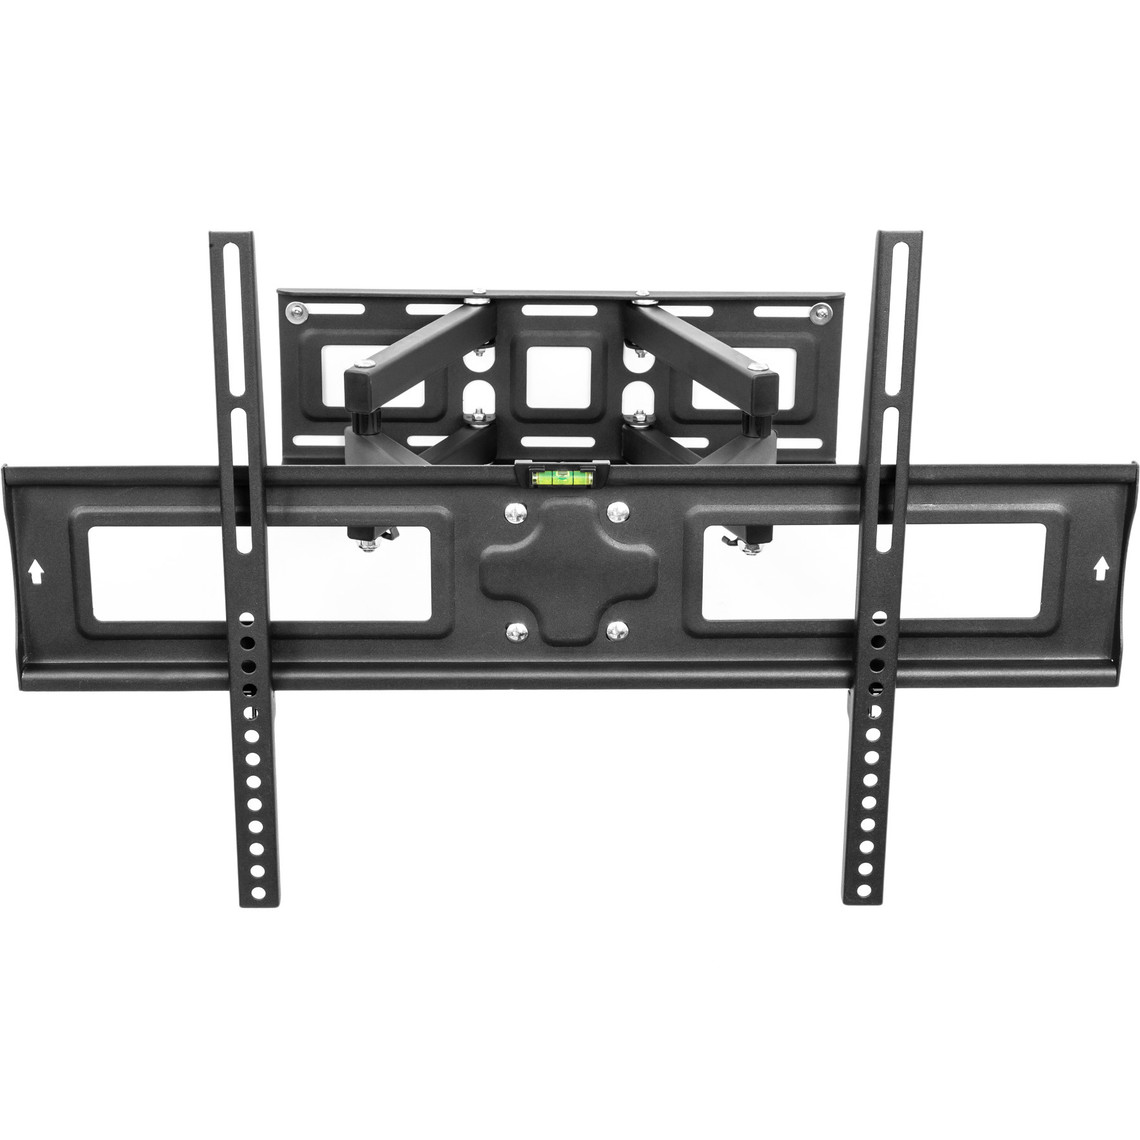 TecTake Support TV mural orientable et inclinable LCD Plasma LED 3D "32-65" 81-165cm 